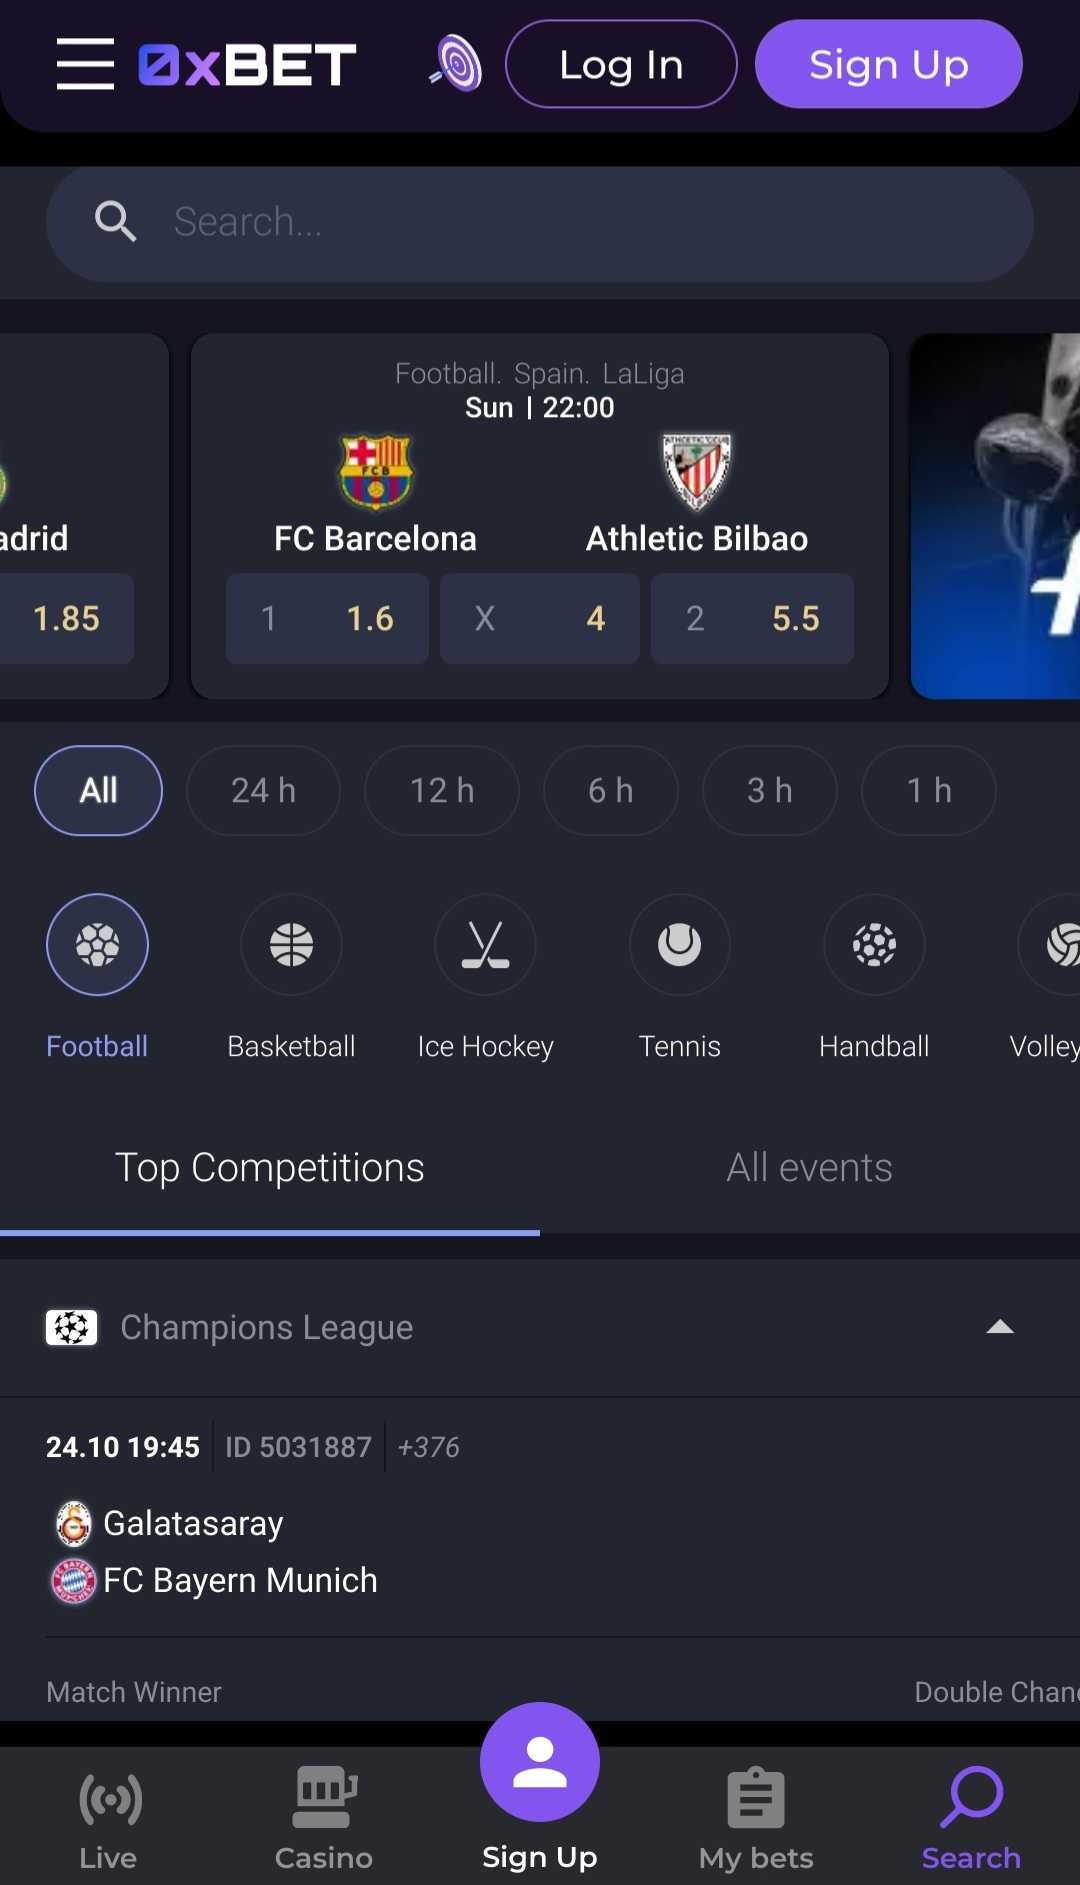 0xbet-sporto-betting-offers-mobile